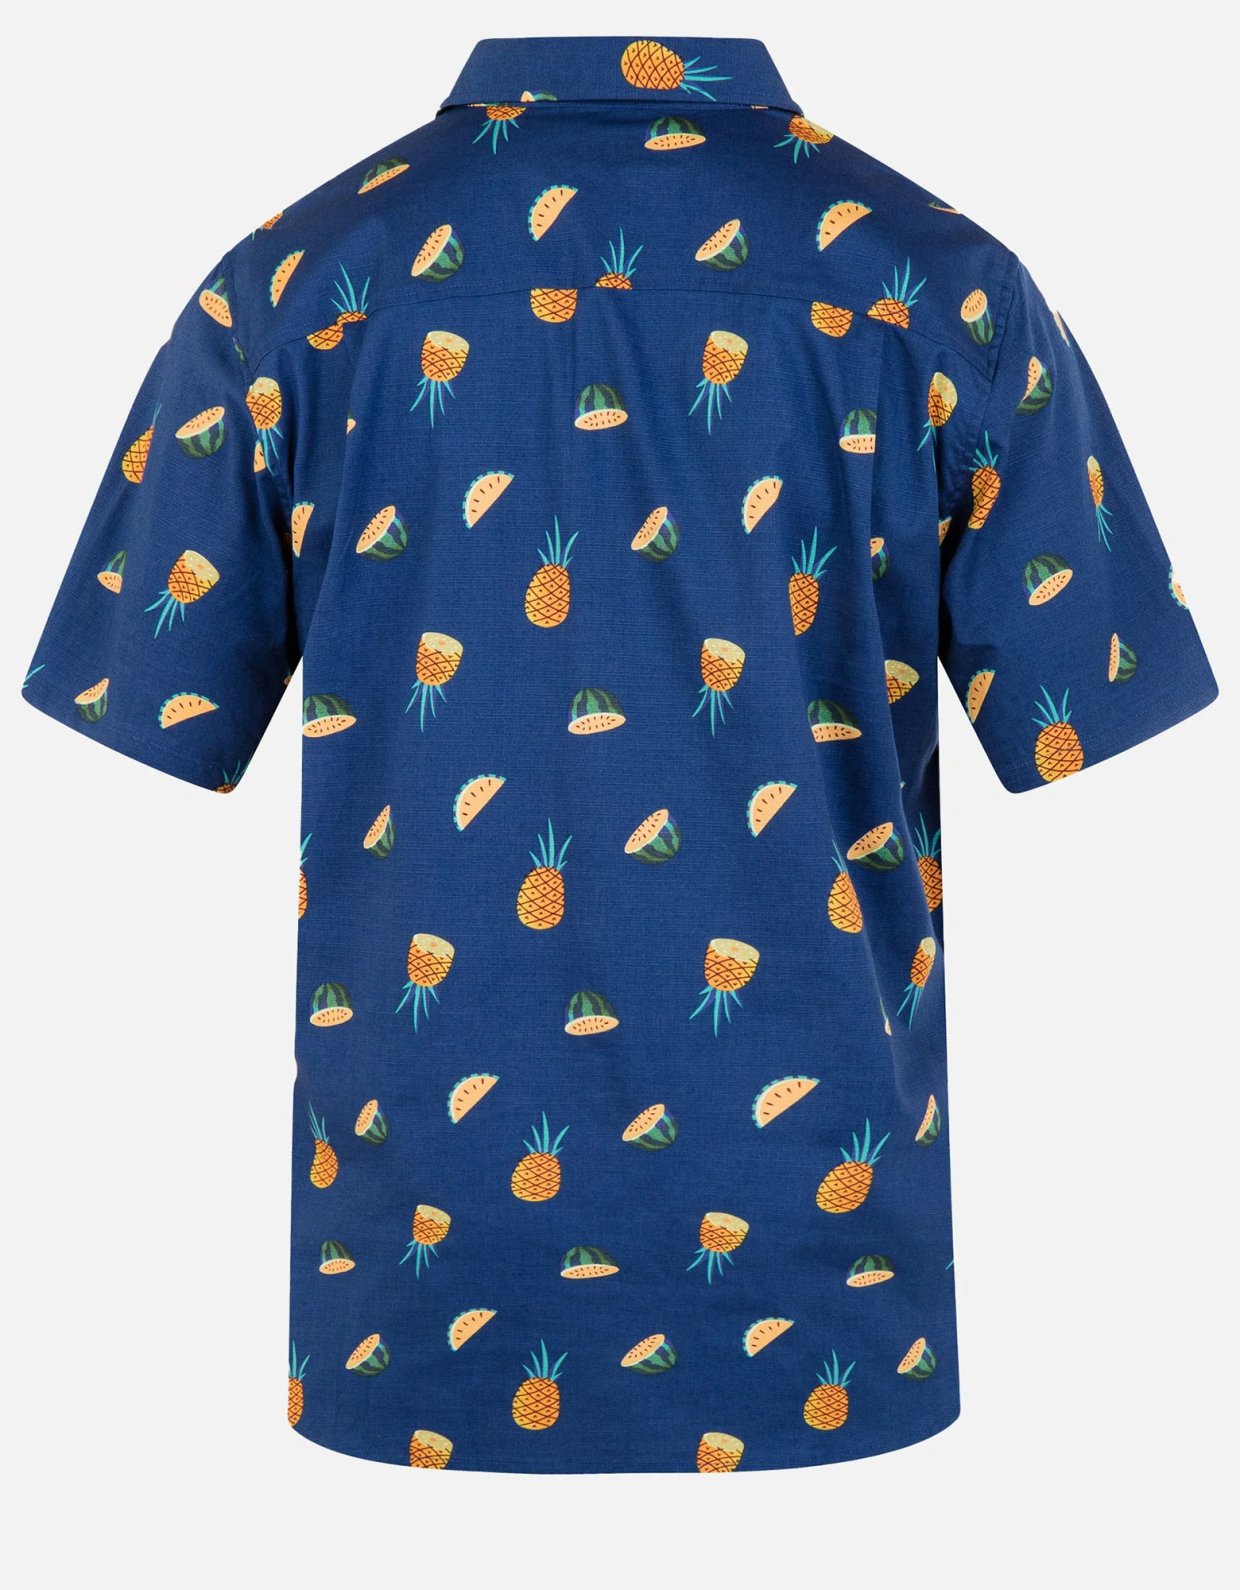 Hurley One and only shirt pinapple